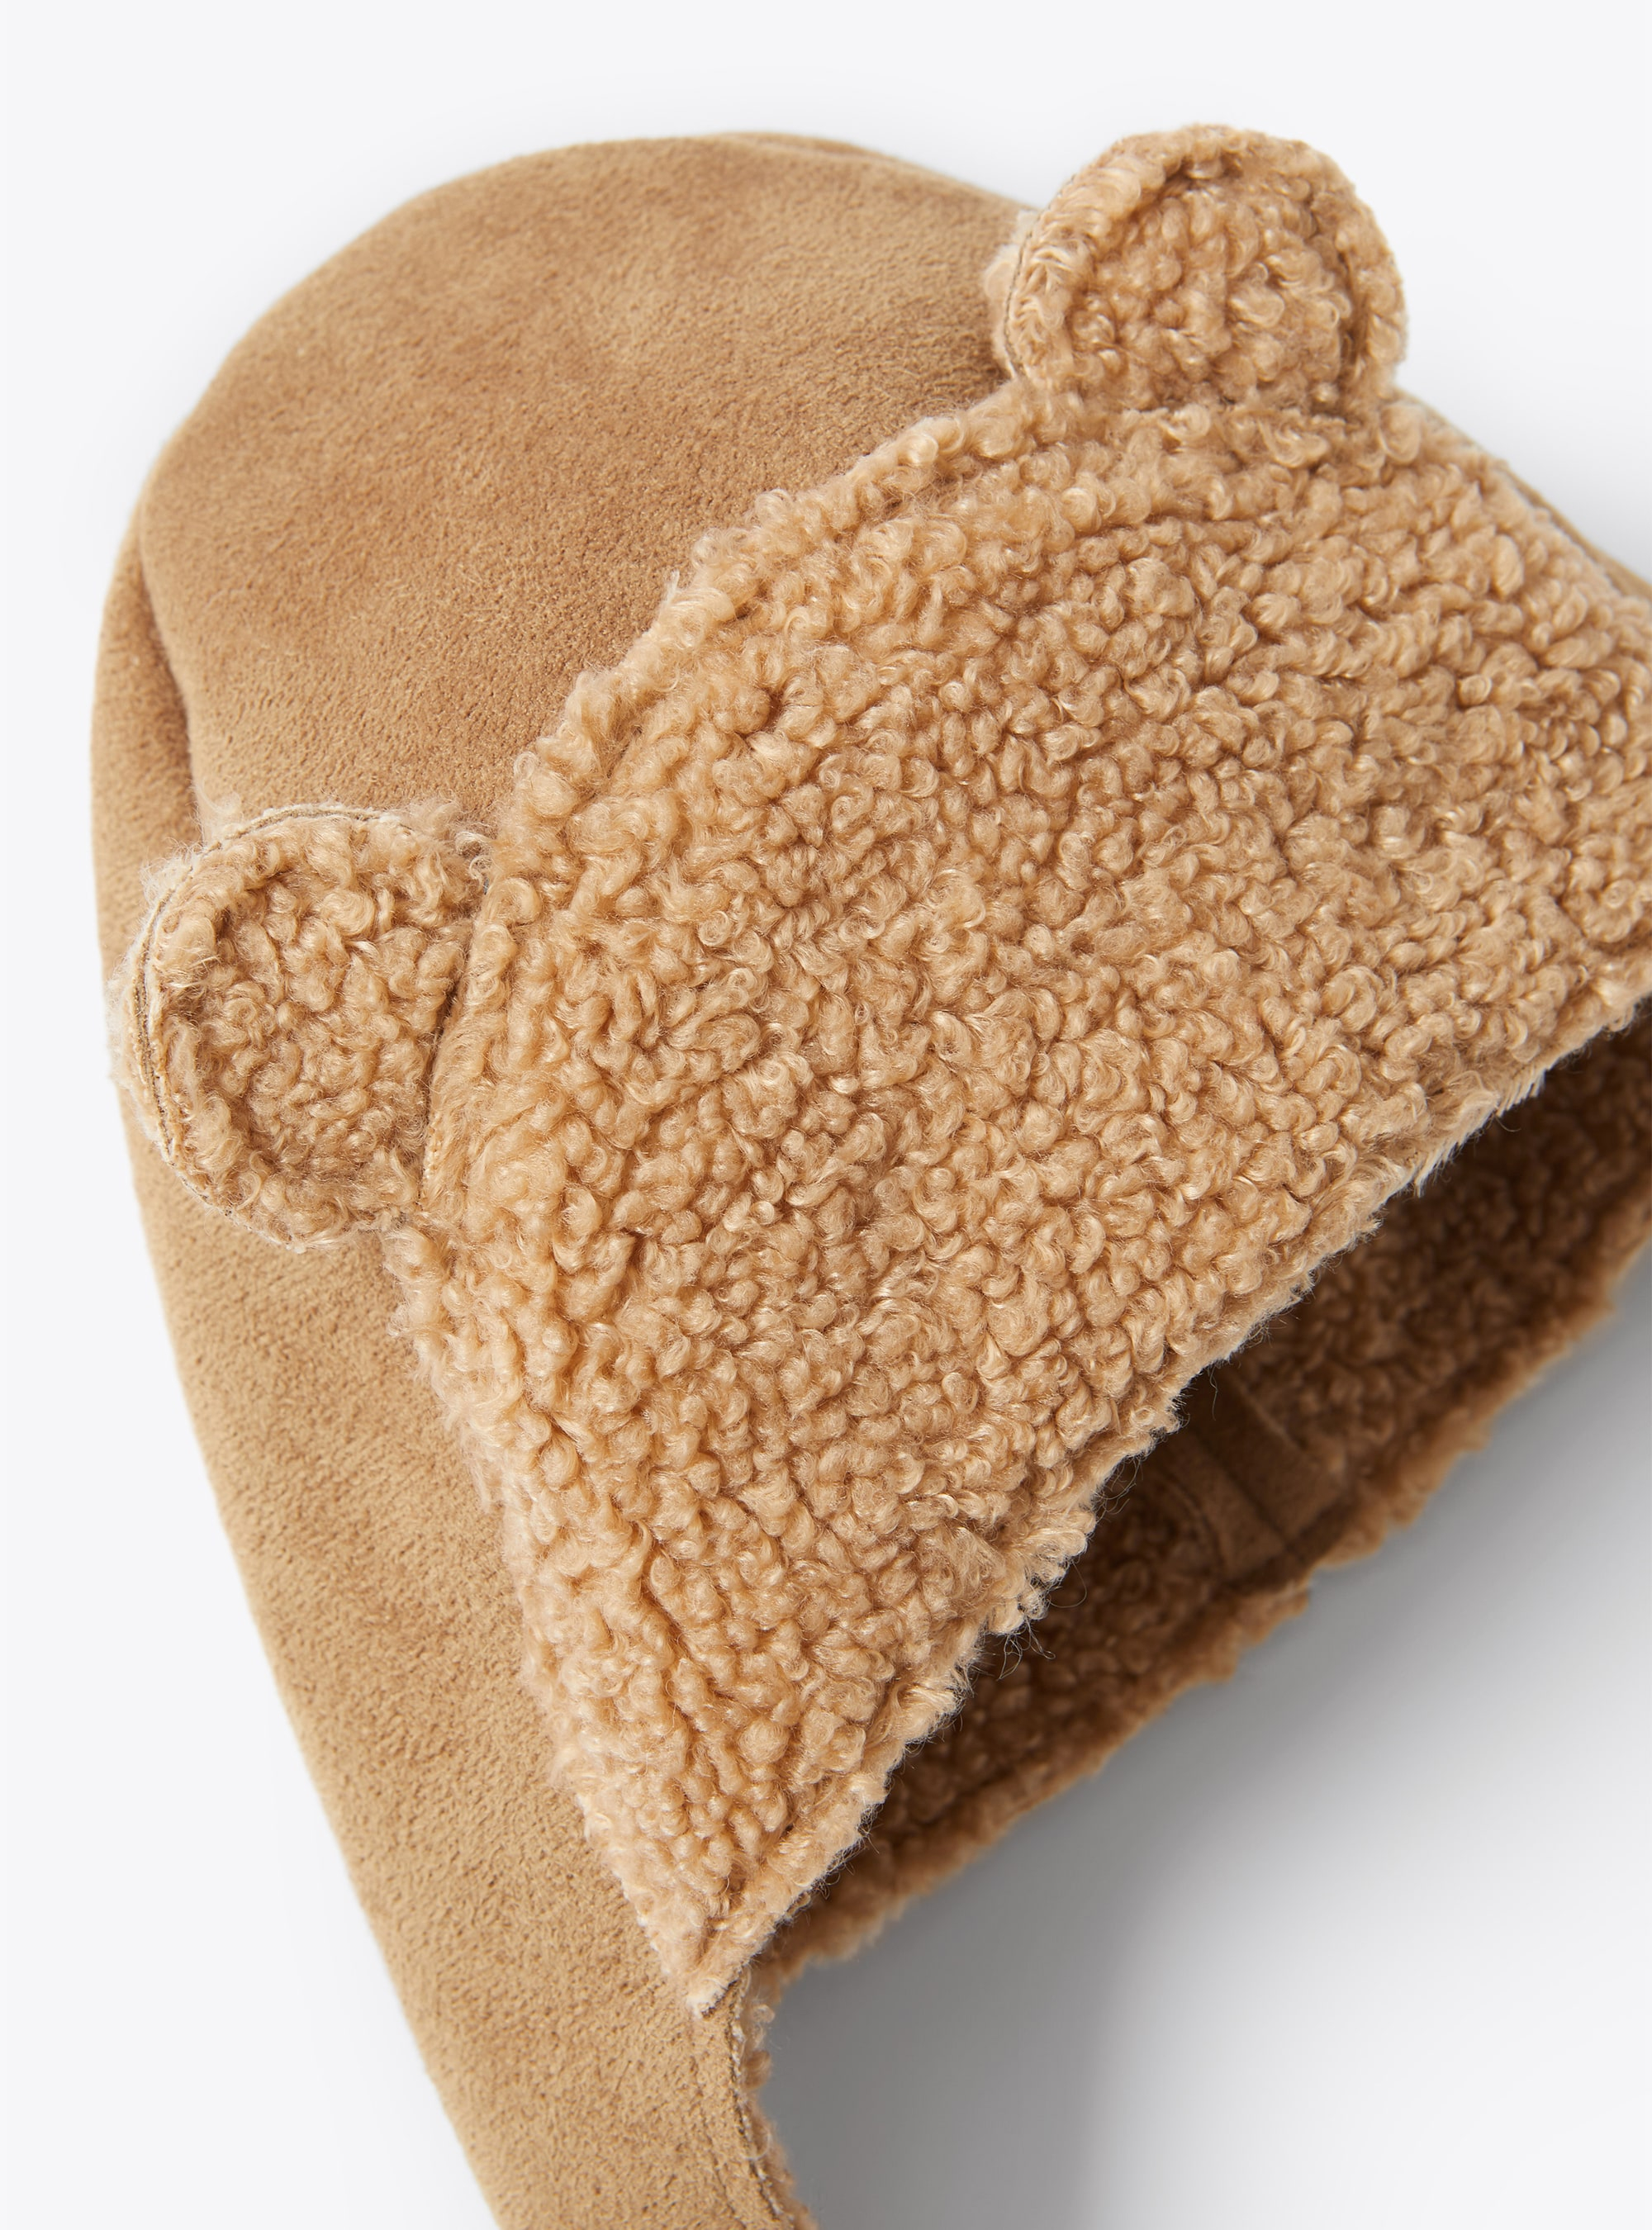 Faux shearling baby hat - Brown | Il Gufo